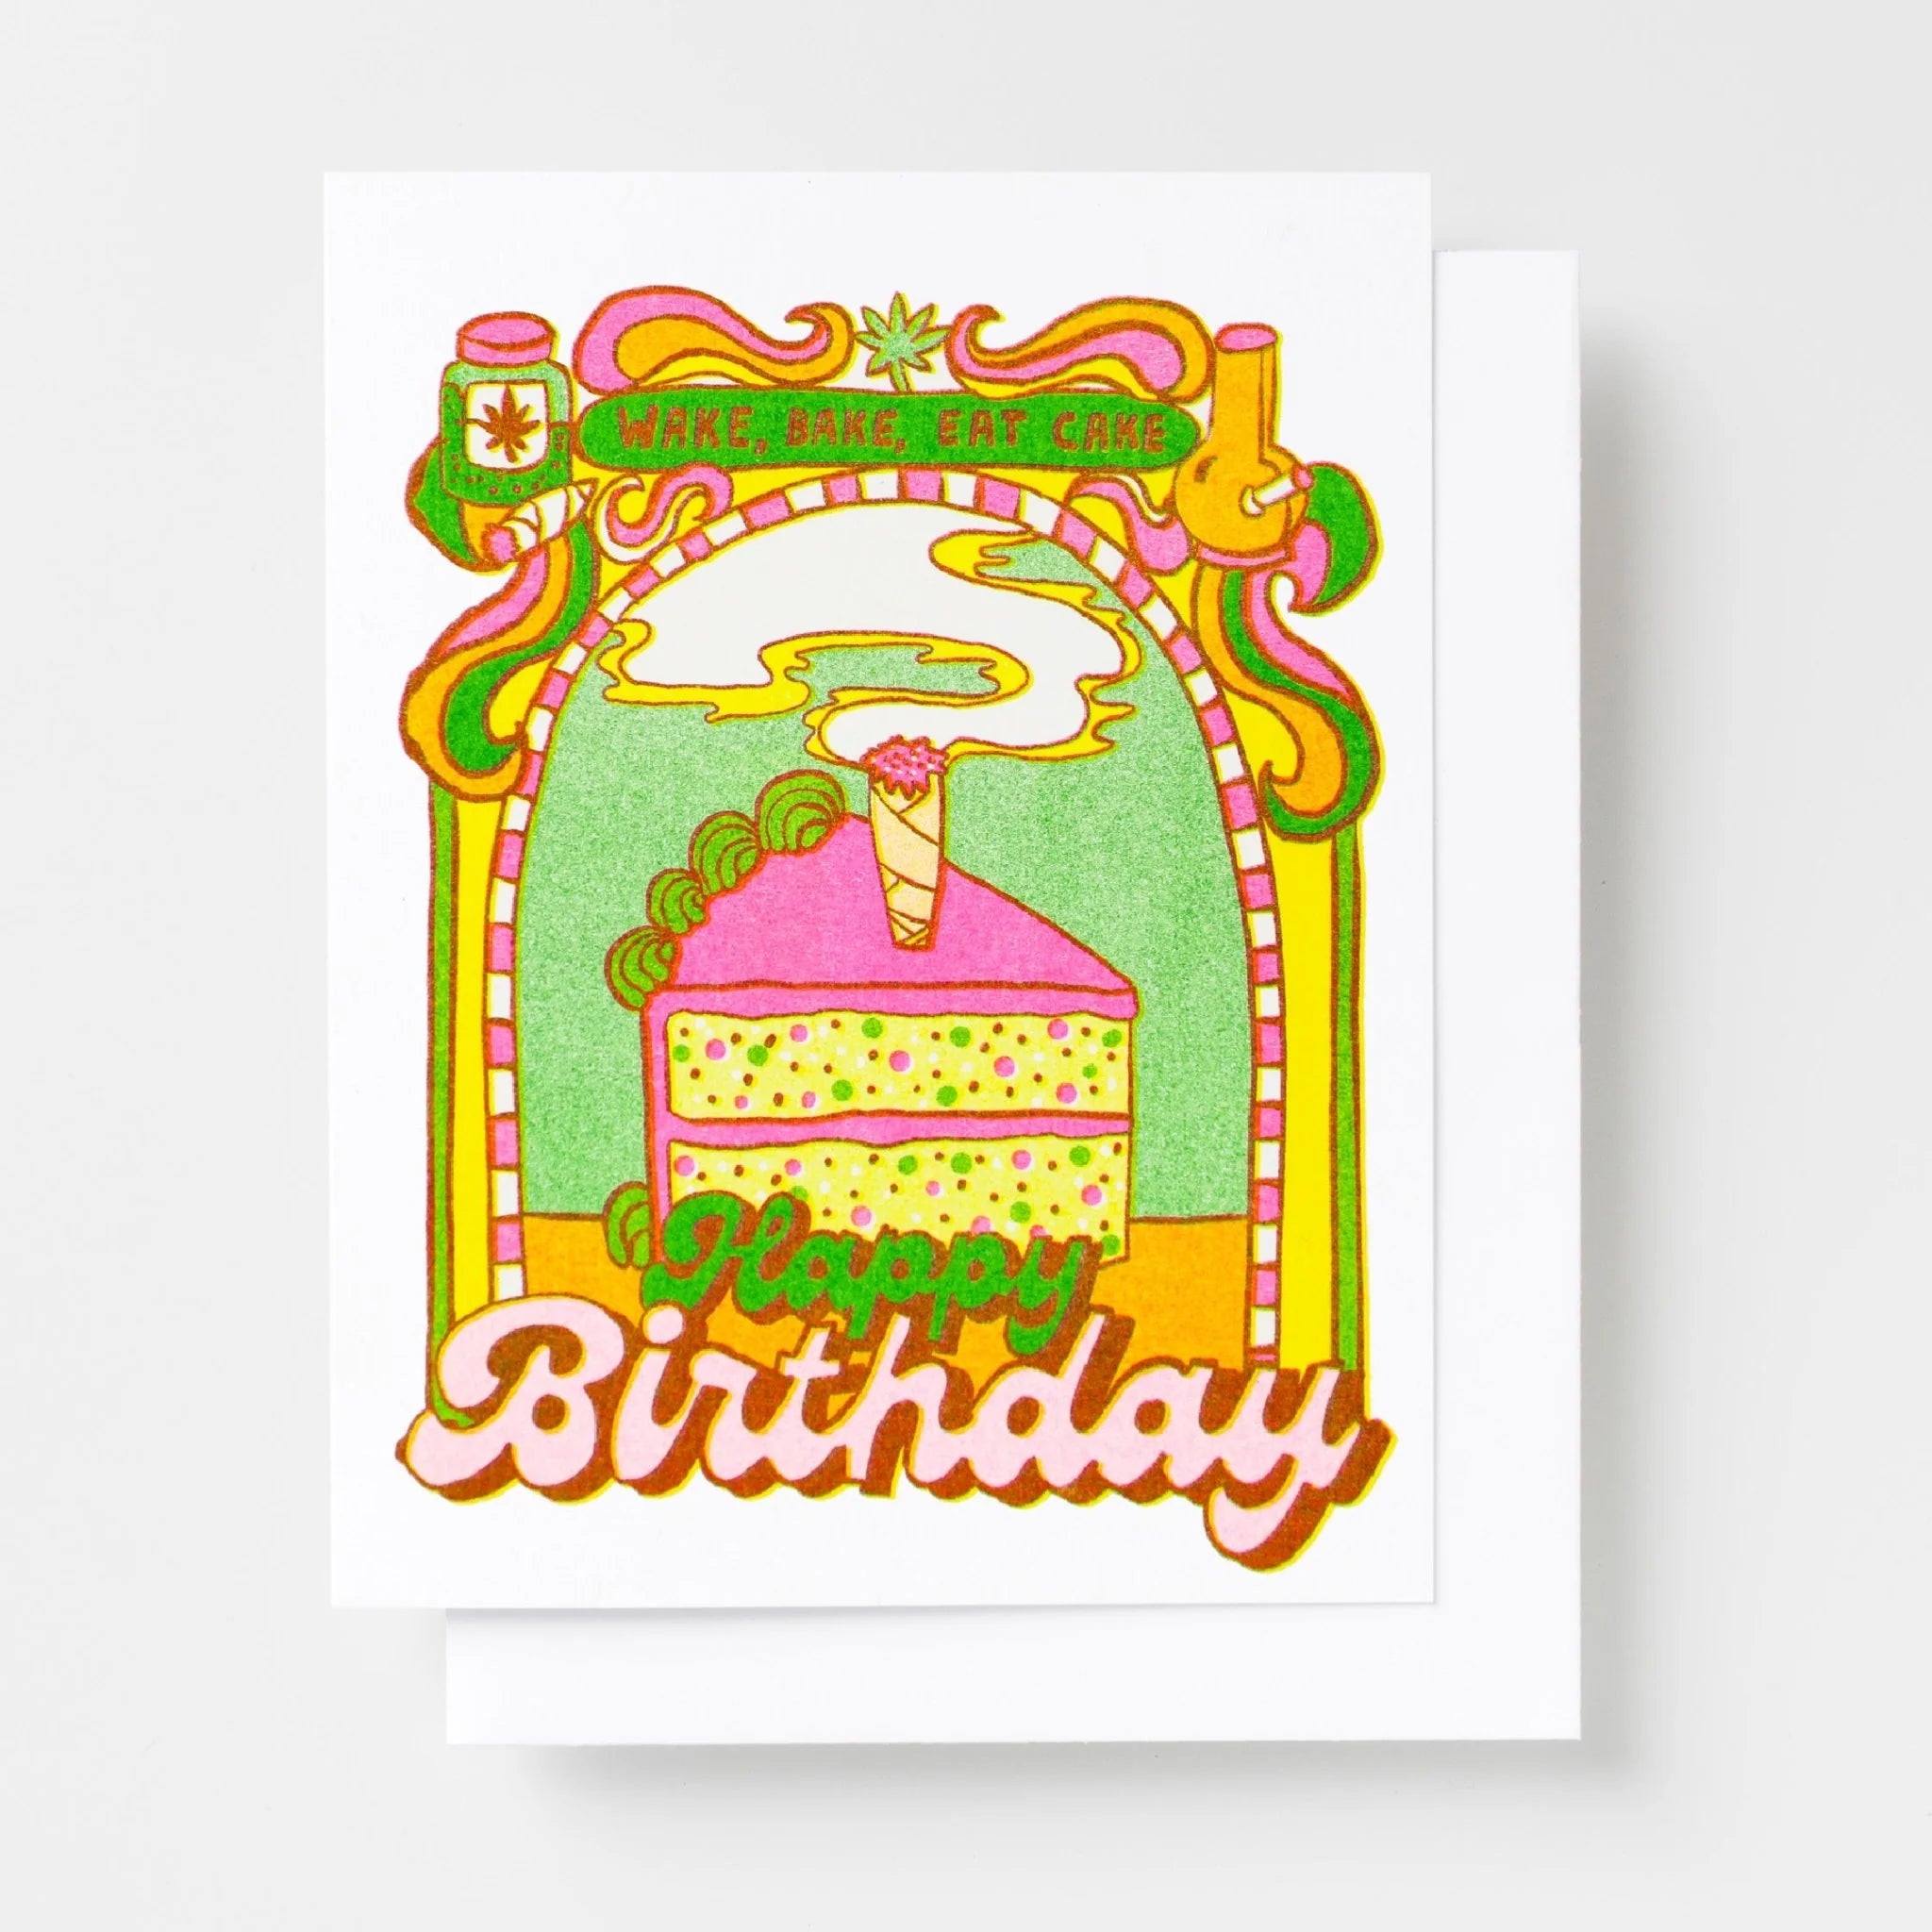 On a white background is a colorful green, yellow and pink card with a cake illustration in the center with a pre-roll in the center and text that reads, &quot;Wake, Bake, Eat Cake Happy Birthday&quot;.